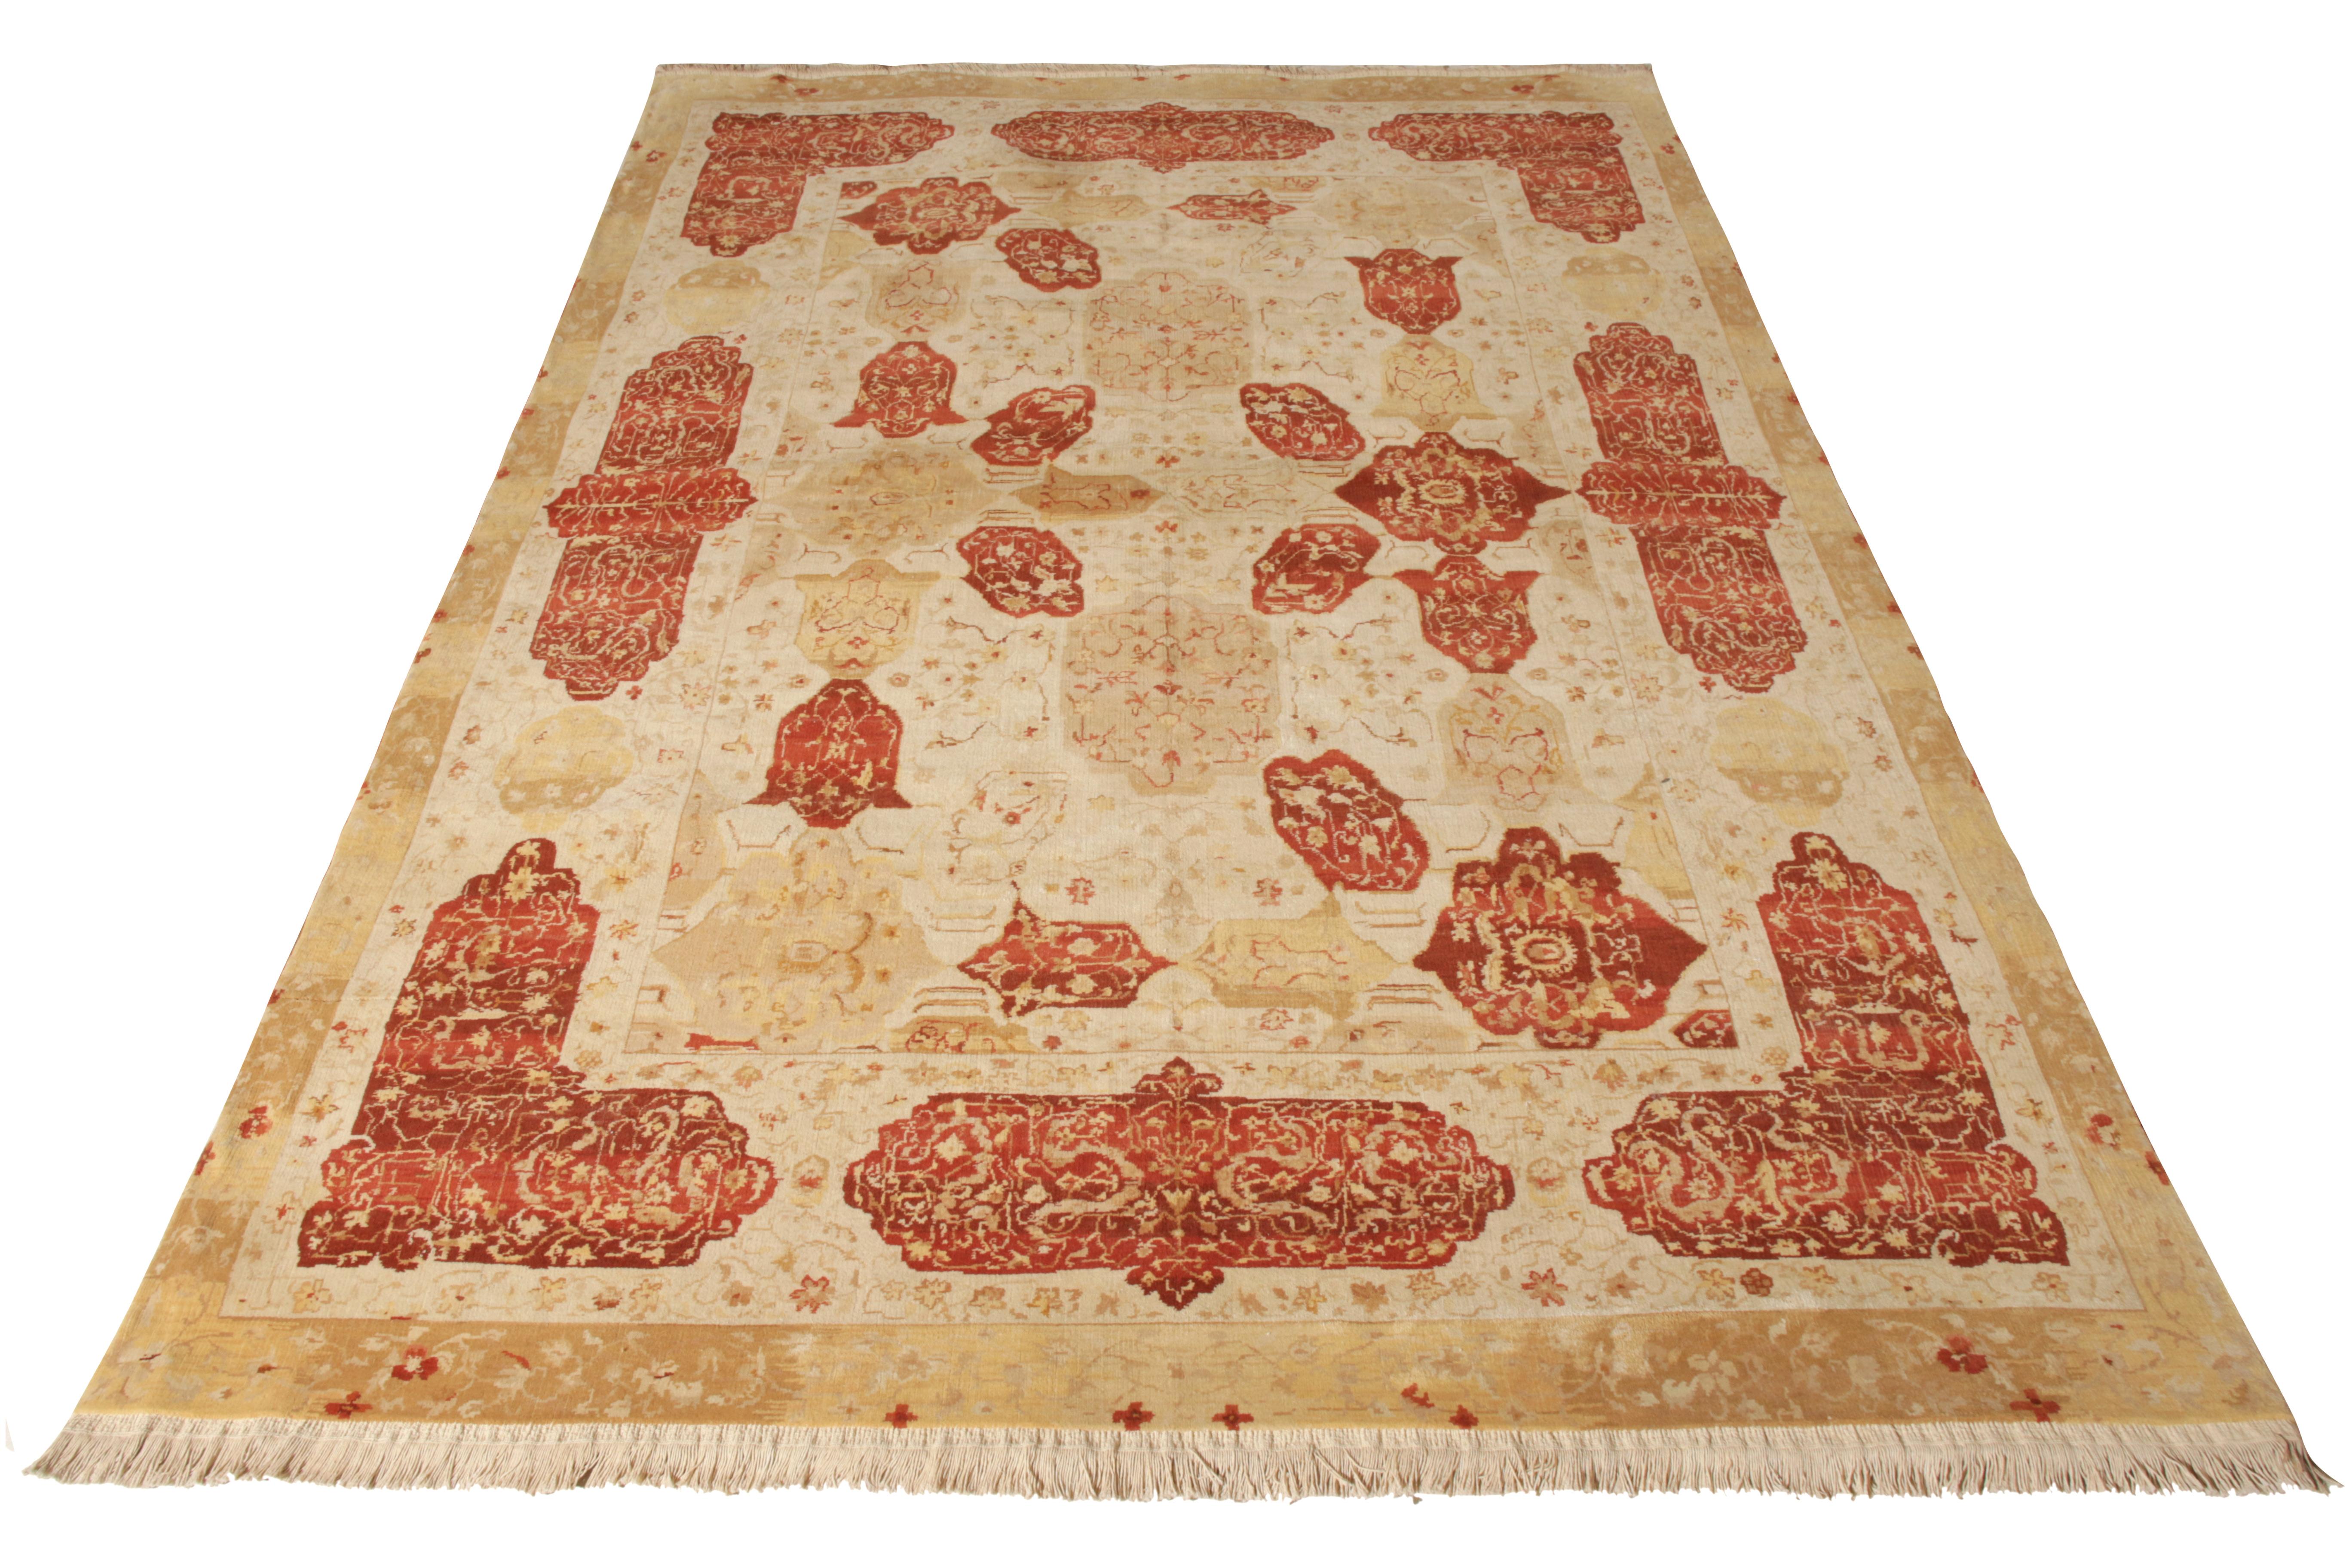 This 6x9 rug is an exciting new addition to the Modern Classics Collection by Rug & Kilim. Hand-knotted in wool, its design draws inspiration from rare antique Agra rug designs with warm hues and fine details.

On the Design: 

This piece enjoys a